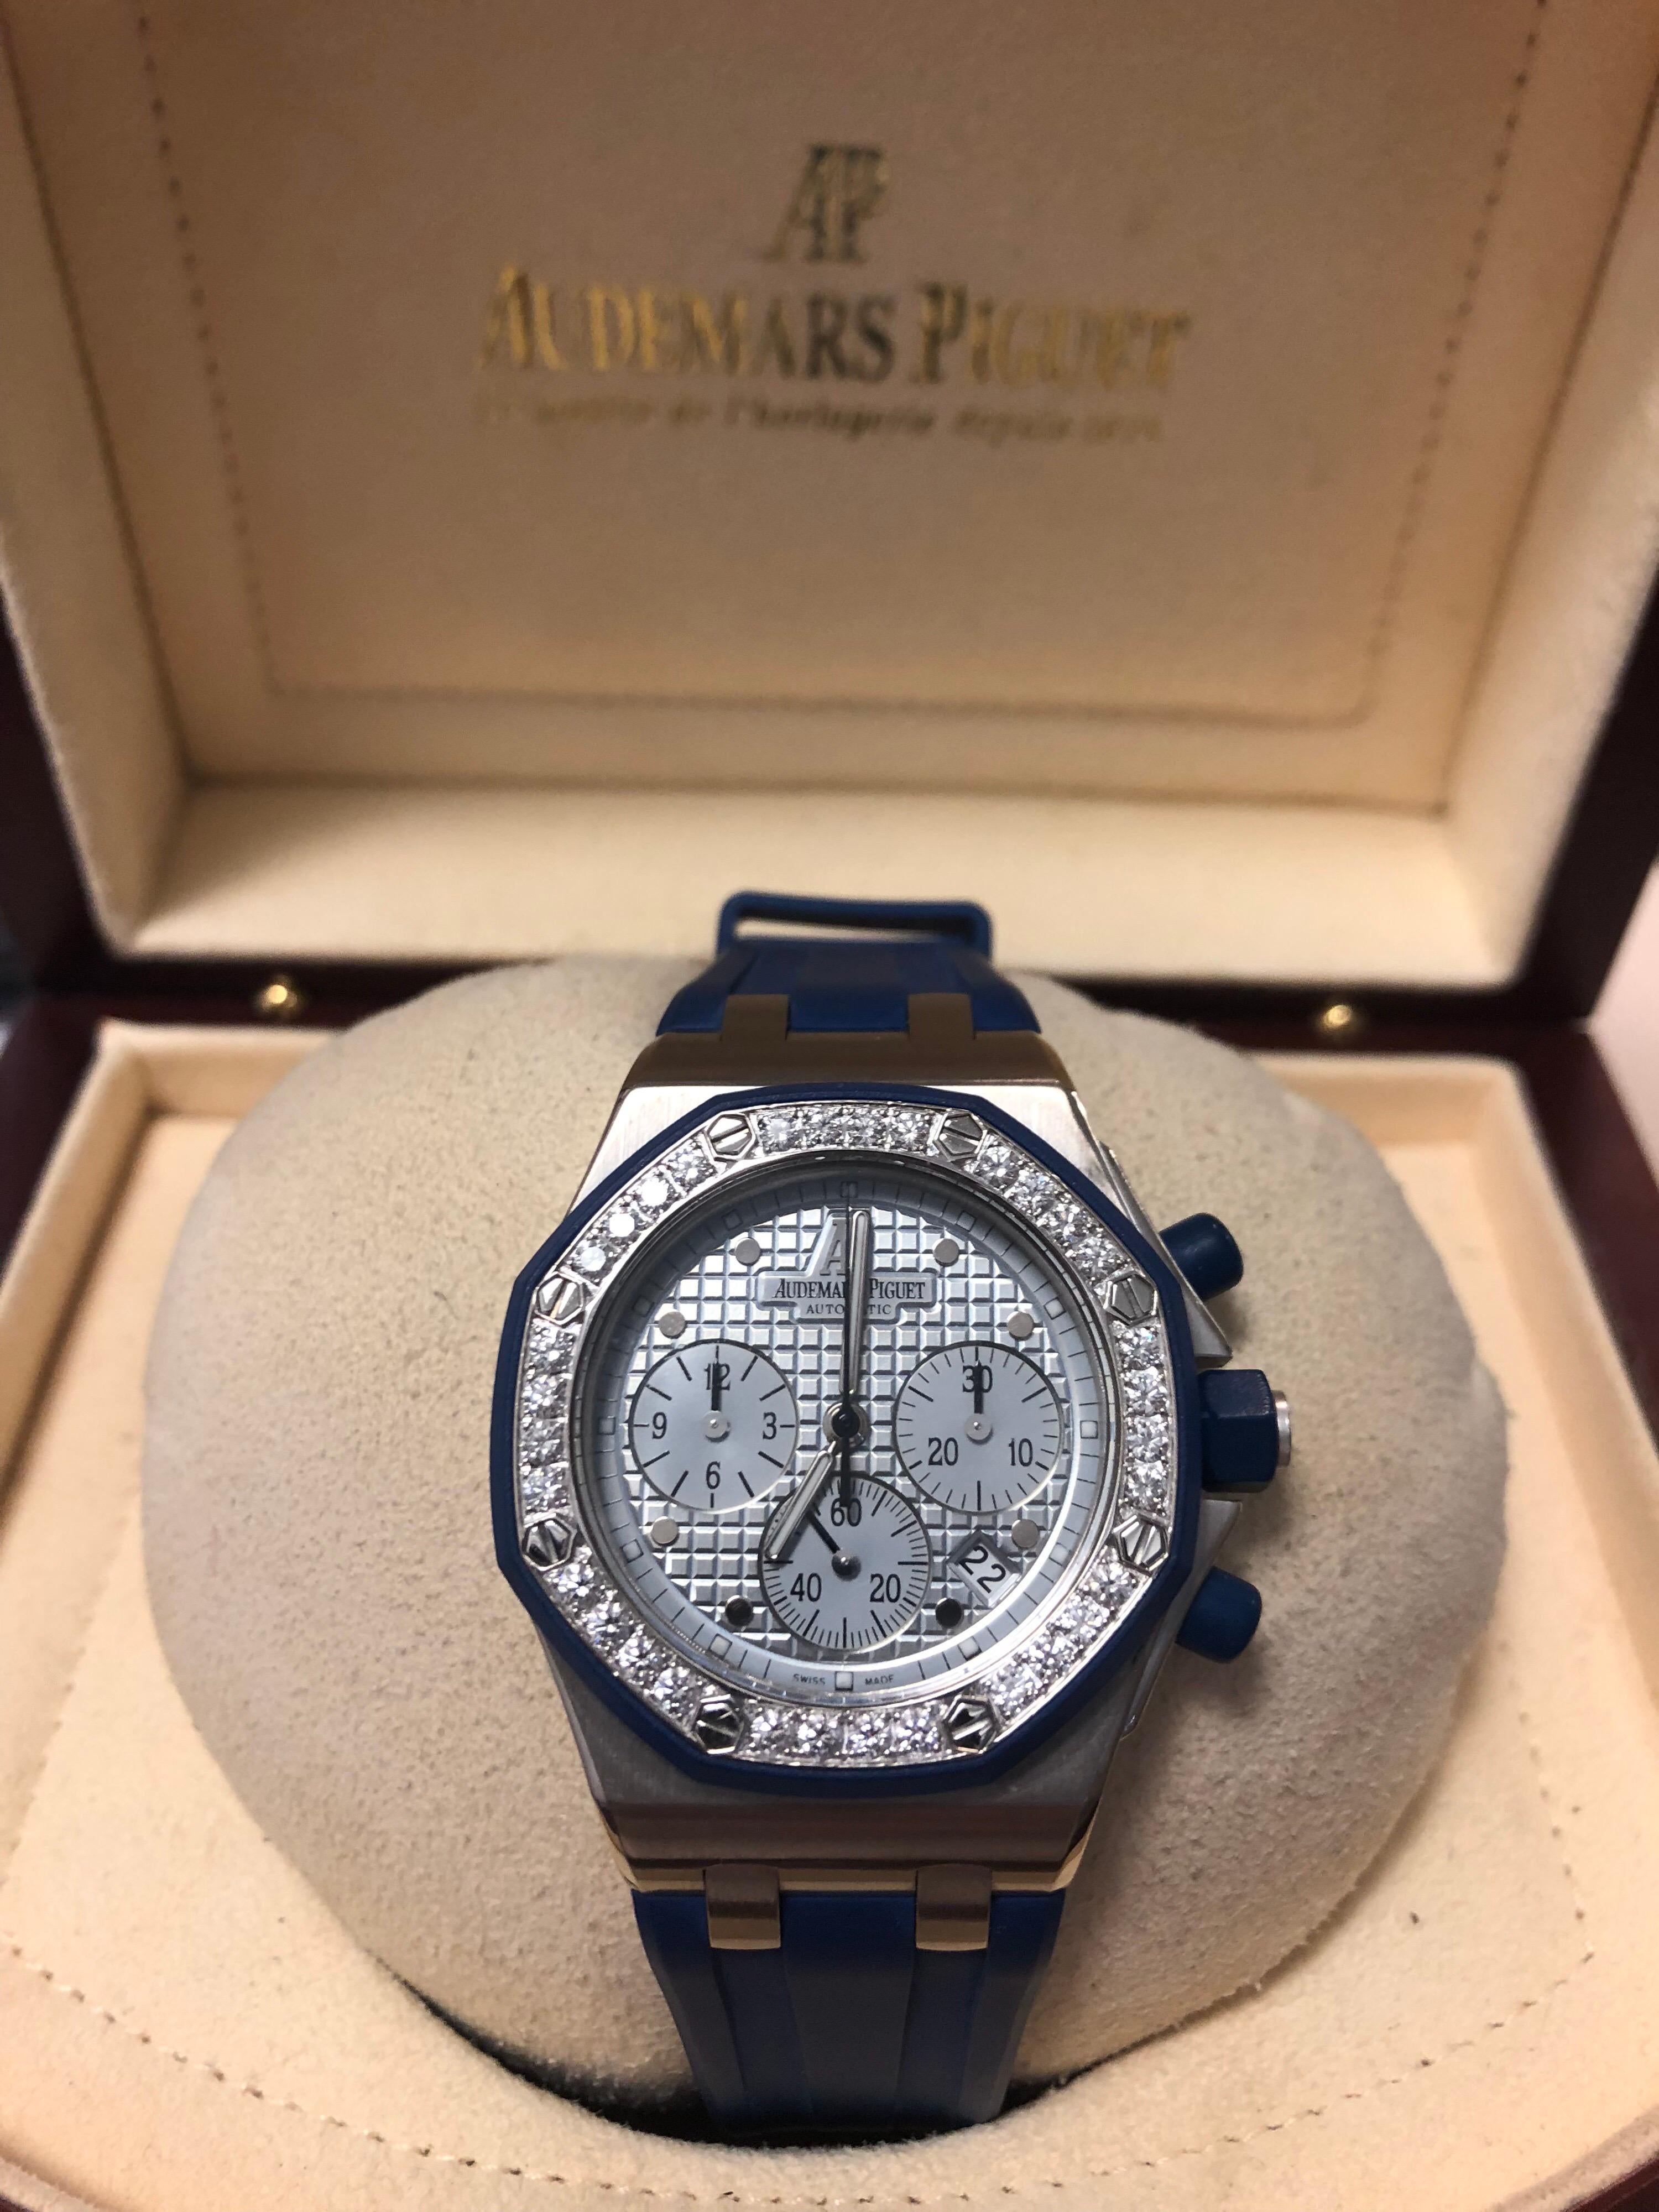 Rare 18 karat white gold royal oak ladies offshore. The watch is a 37mm chronograph featuring an automatic movement. Calibre 2120 & 2121. There are 37 diamonds on the bezel and a date display at the 4:30 position. Blue rubber AP strap and deployant